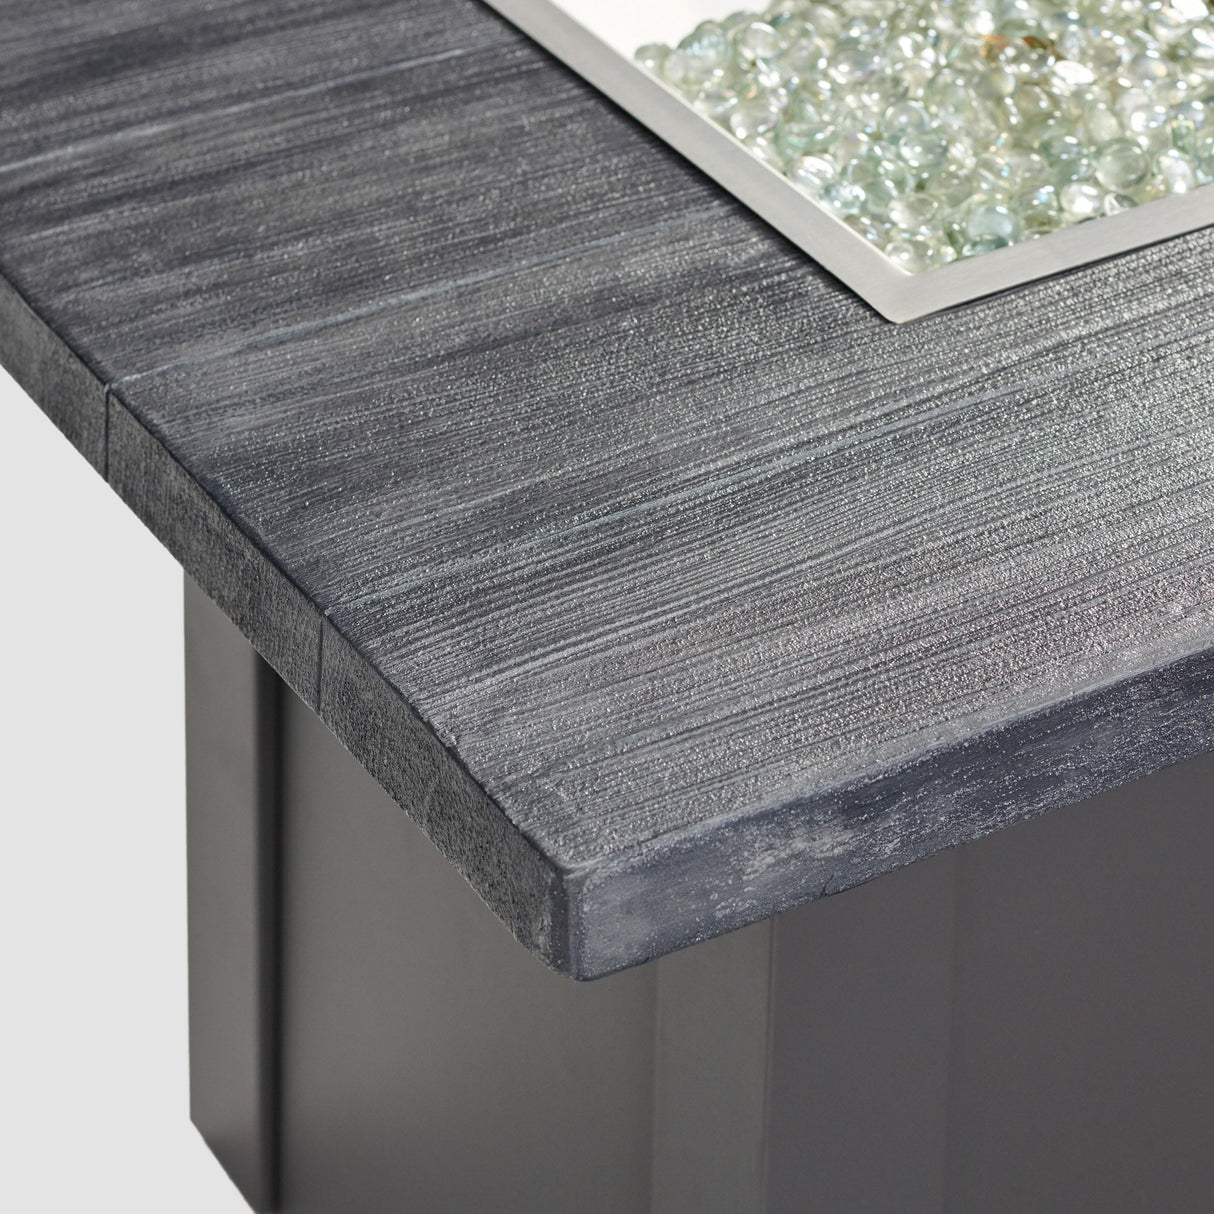 A close up view of the detail found on the top of a Havenwood Linear Gas Fire Pit Table with a Carbon Grey top and Graphite Grey base